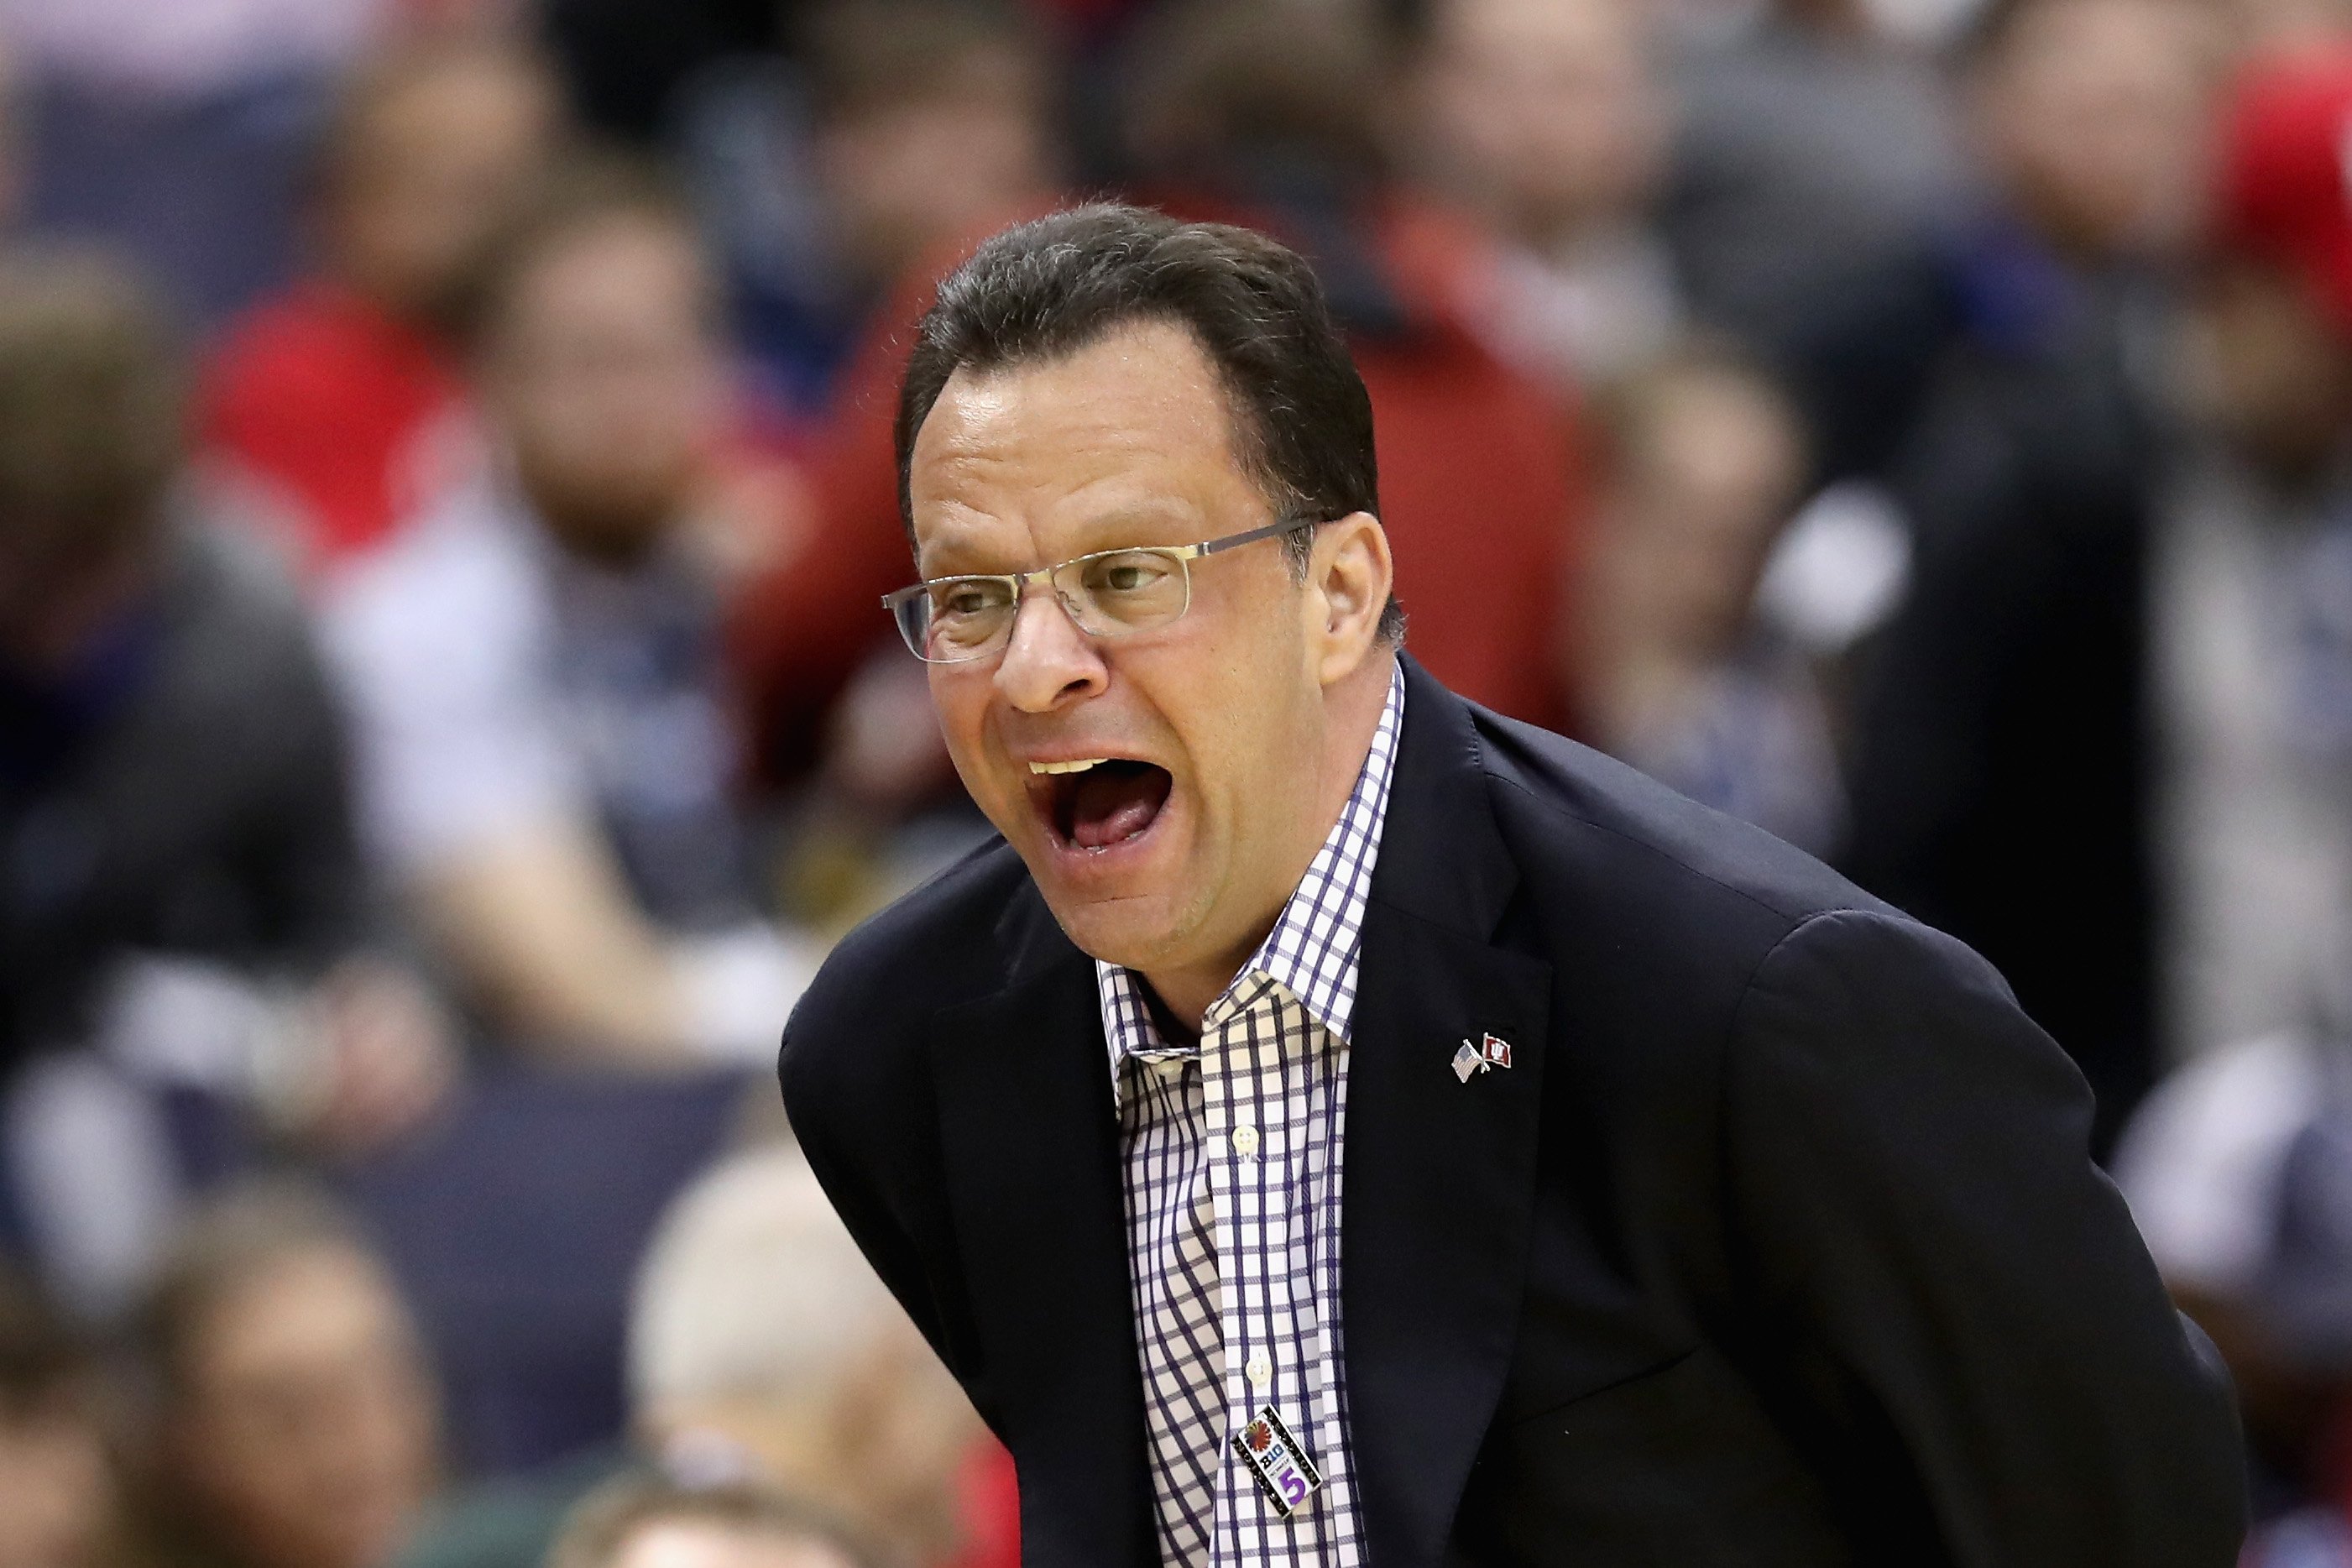 Tom Crean of the Indiana Hoosiers watches from the sidelines against the Wisconsin Badgers during the Big Ten Basketball Tournament at Verizon Center, on March 10, 2017 in Washington, DC. | Source: Getty Images